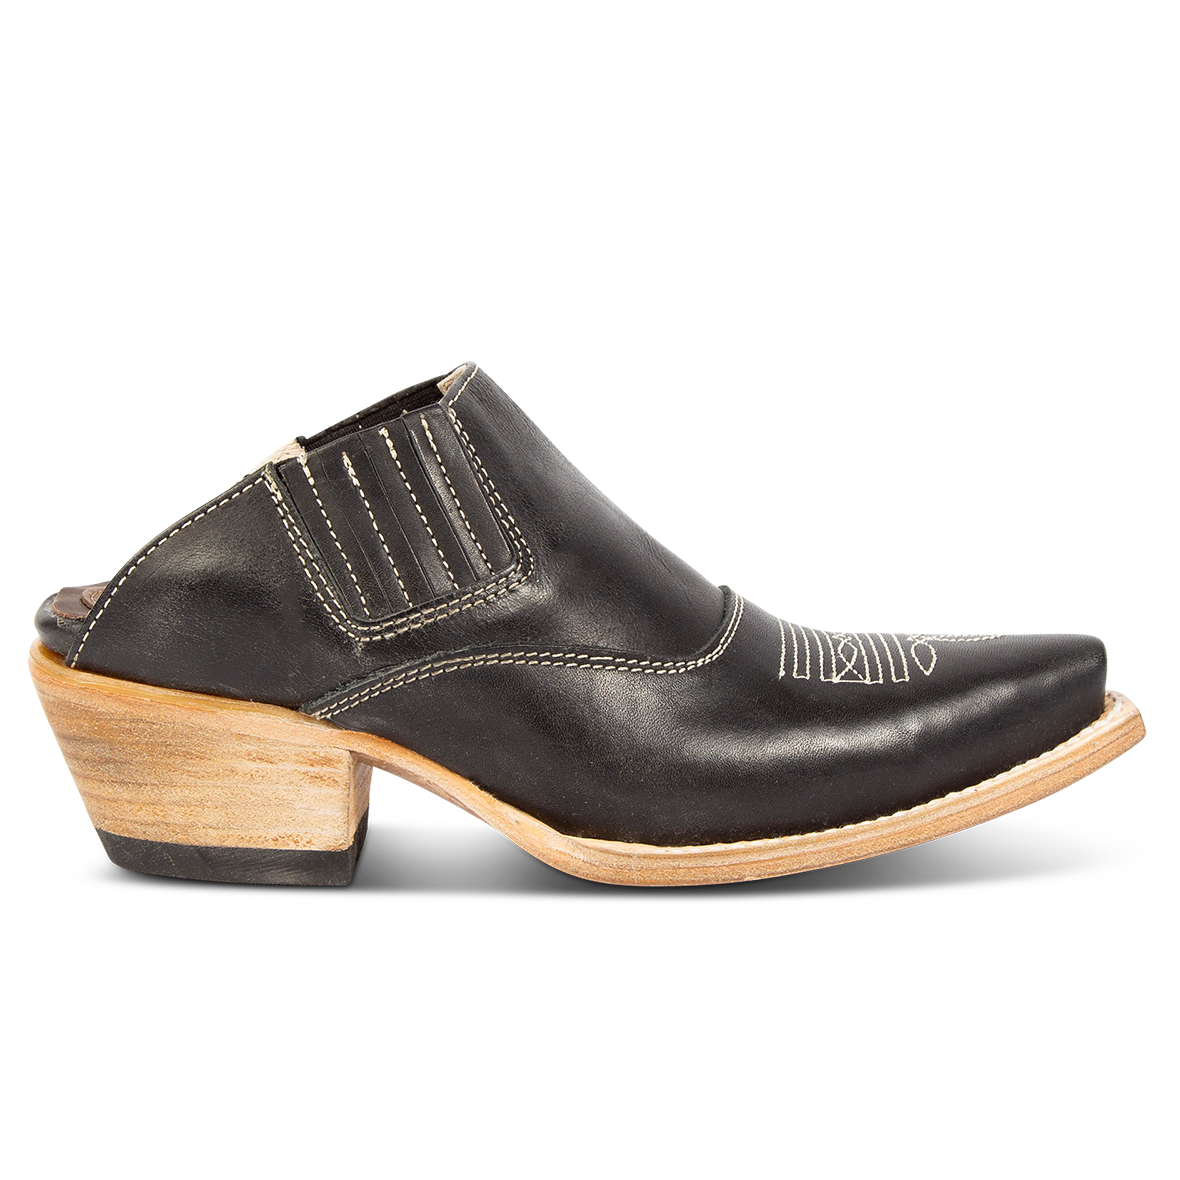 FREEBIRD women's Wentworth black western mule featuring elastic gore, stitch detailing, open back, and snip toe